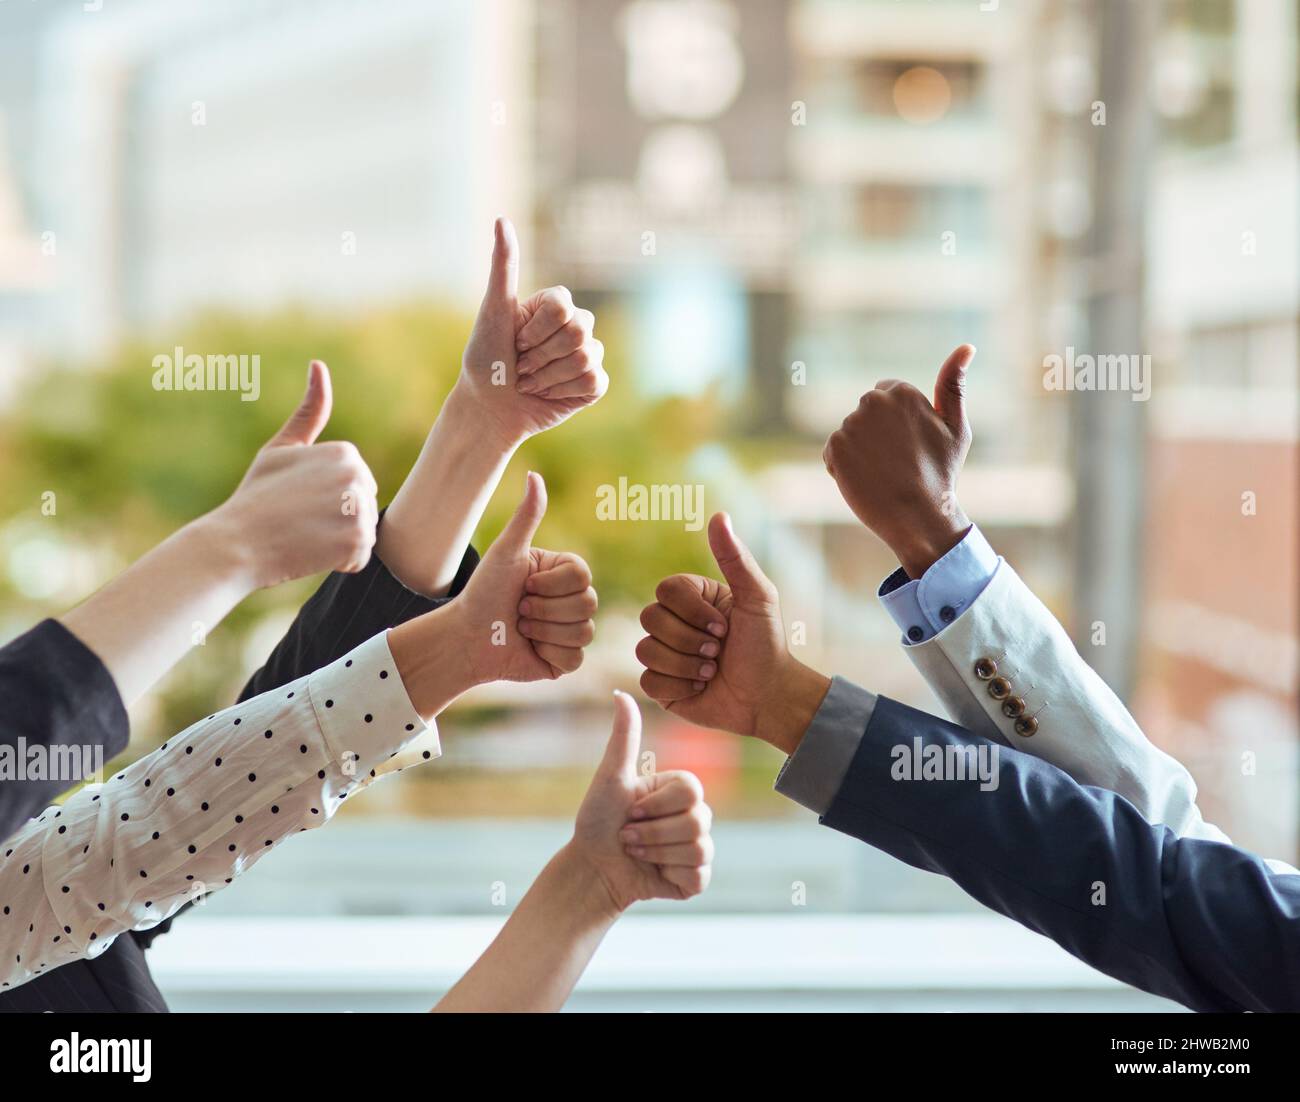 Exceptional work. Cropped shot of a group of businesspeople showing a thumbs up gesture. Stock Photo